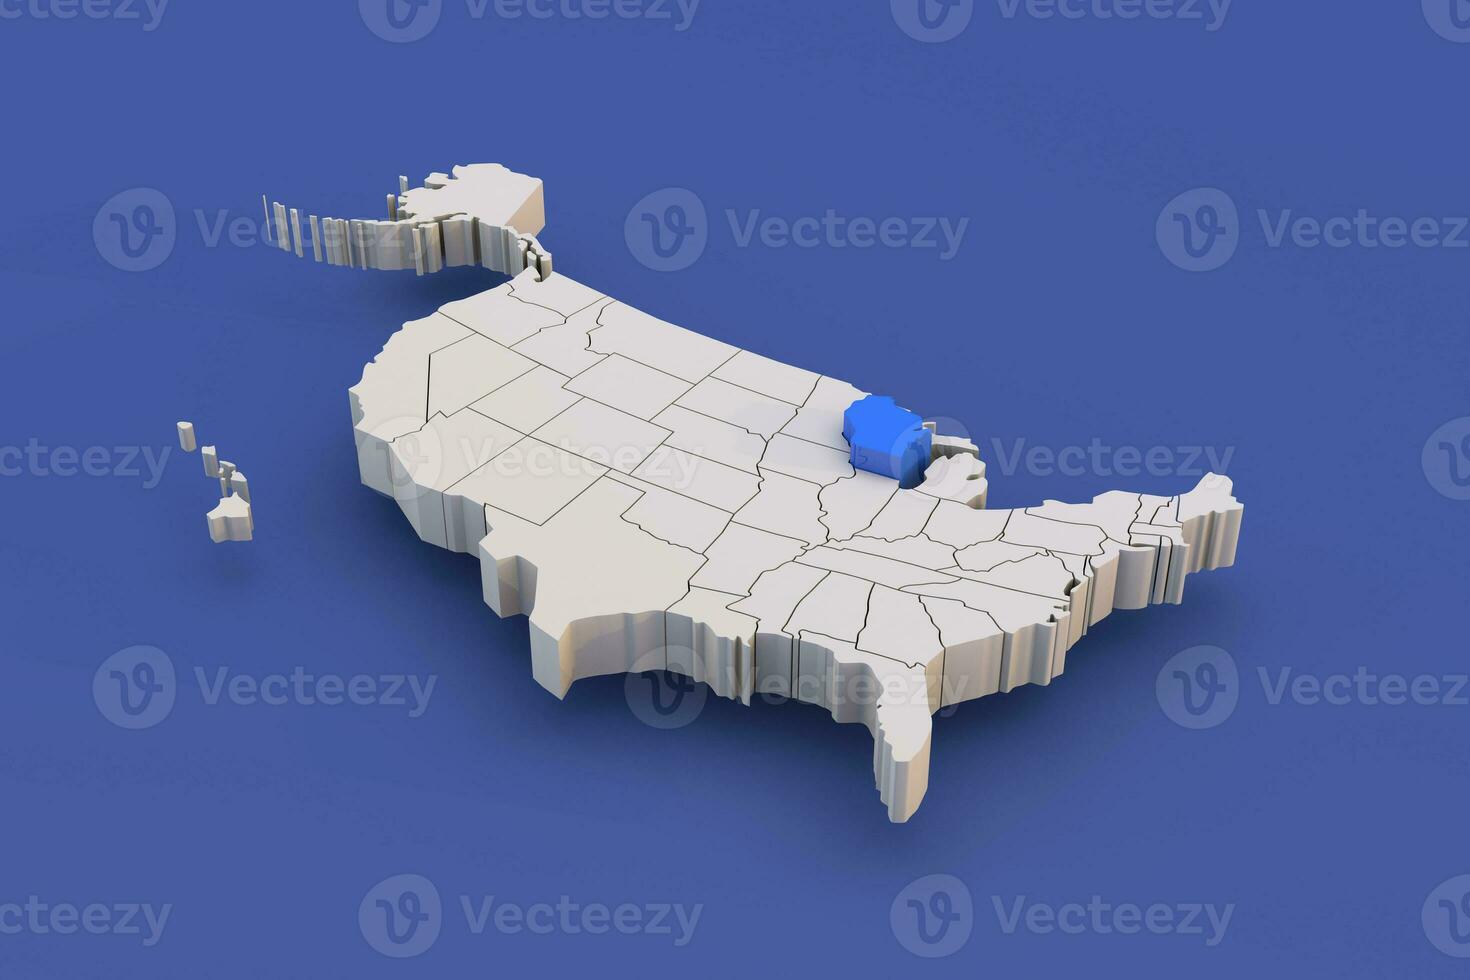 Wisconsin state of USA map with white states a 3D united states of america map photo